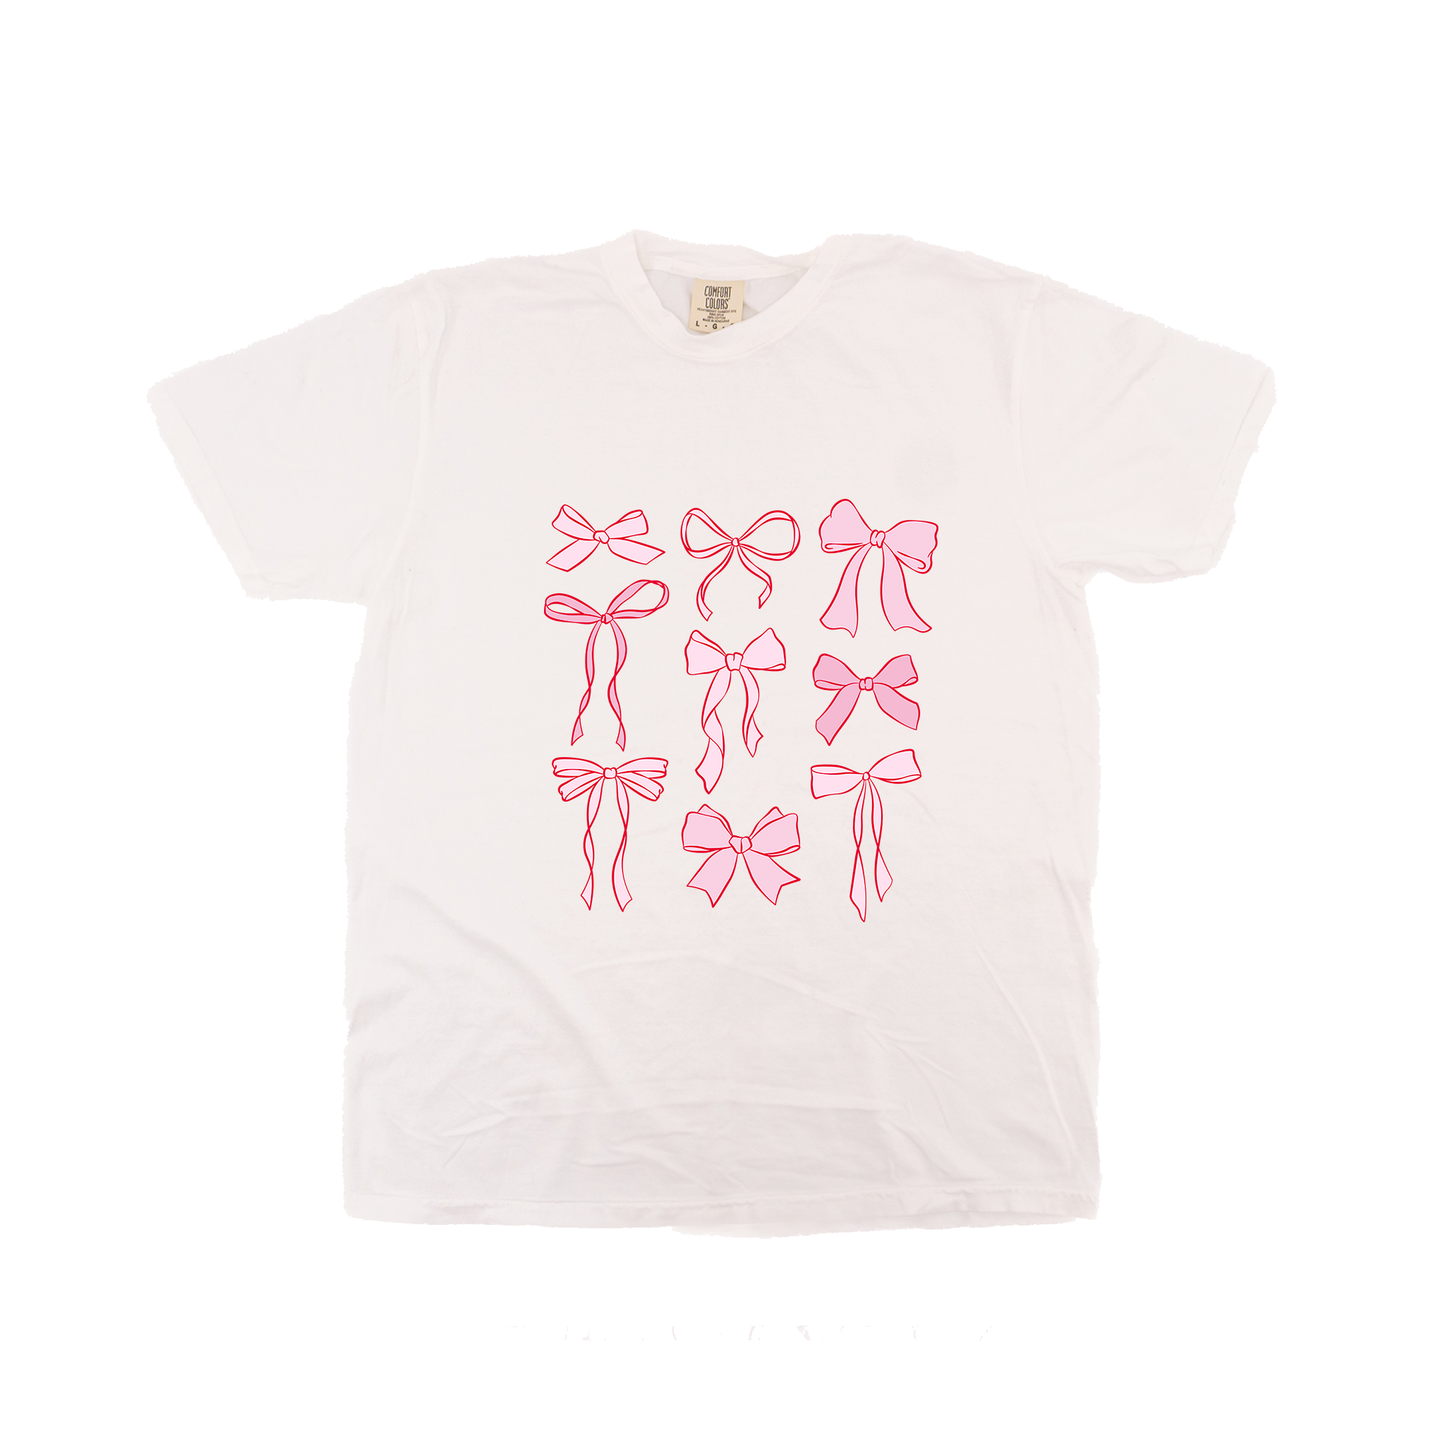 Hand Drawn Pink Bows - Tee (Vintage White, Short Sleeve)